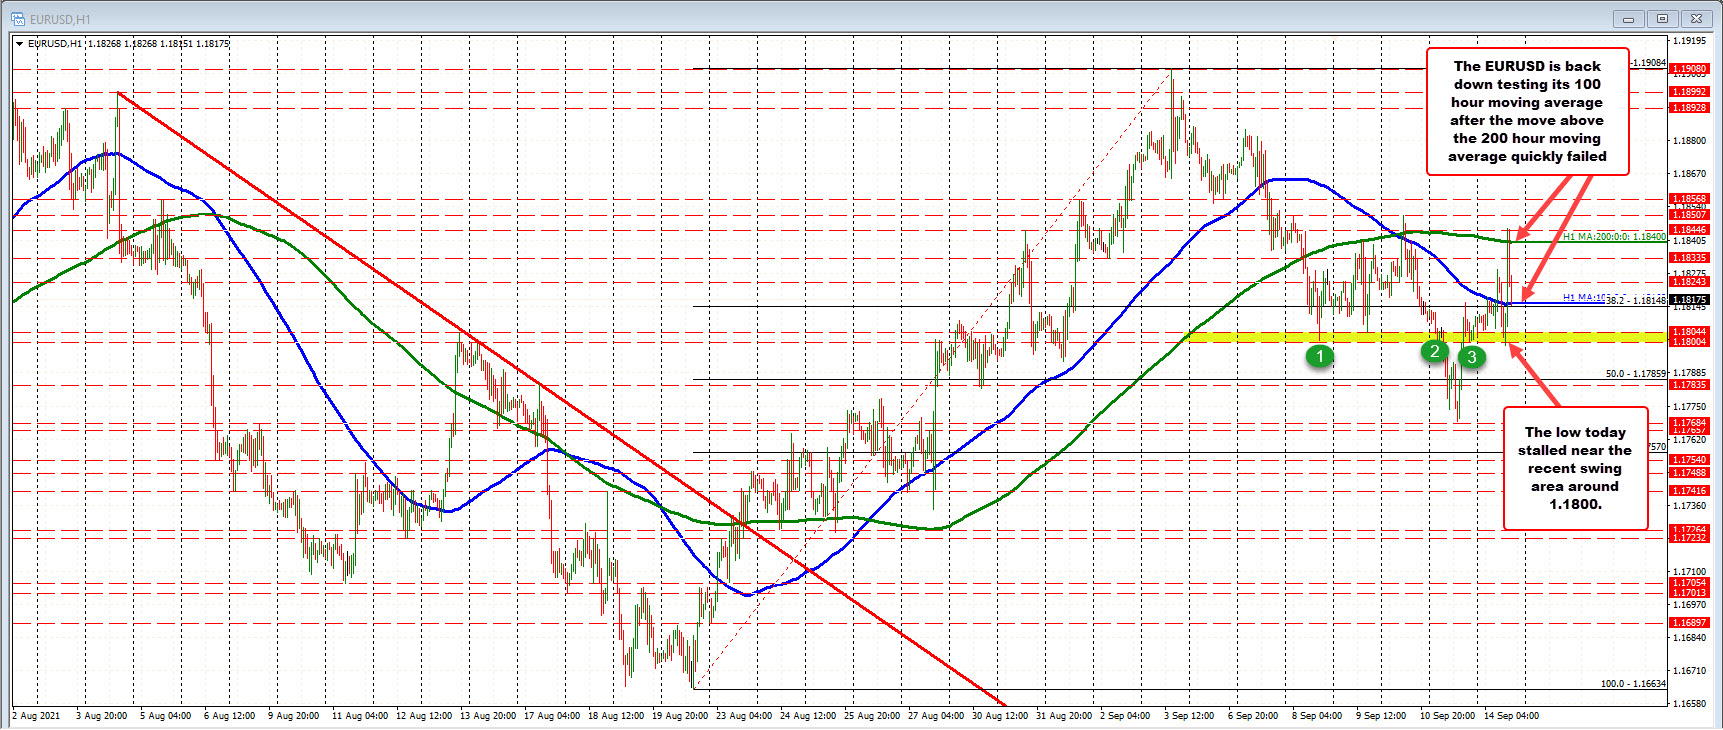 38.2% retracement 1.18148. The 100 hour moving average 1.18159_